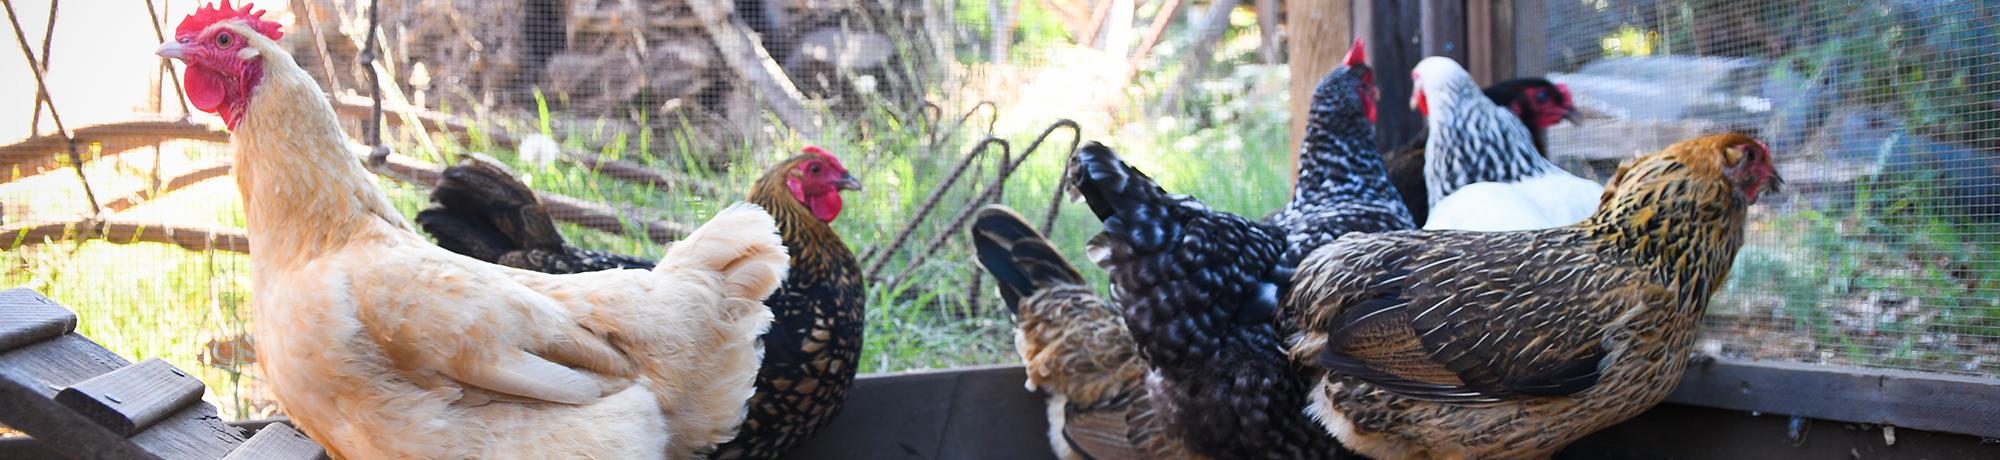 Agriculture and Food Safety and Security - Backyard Chickens